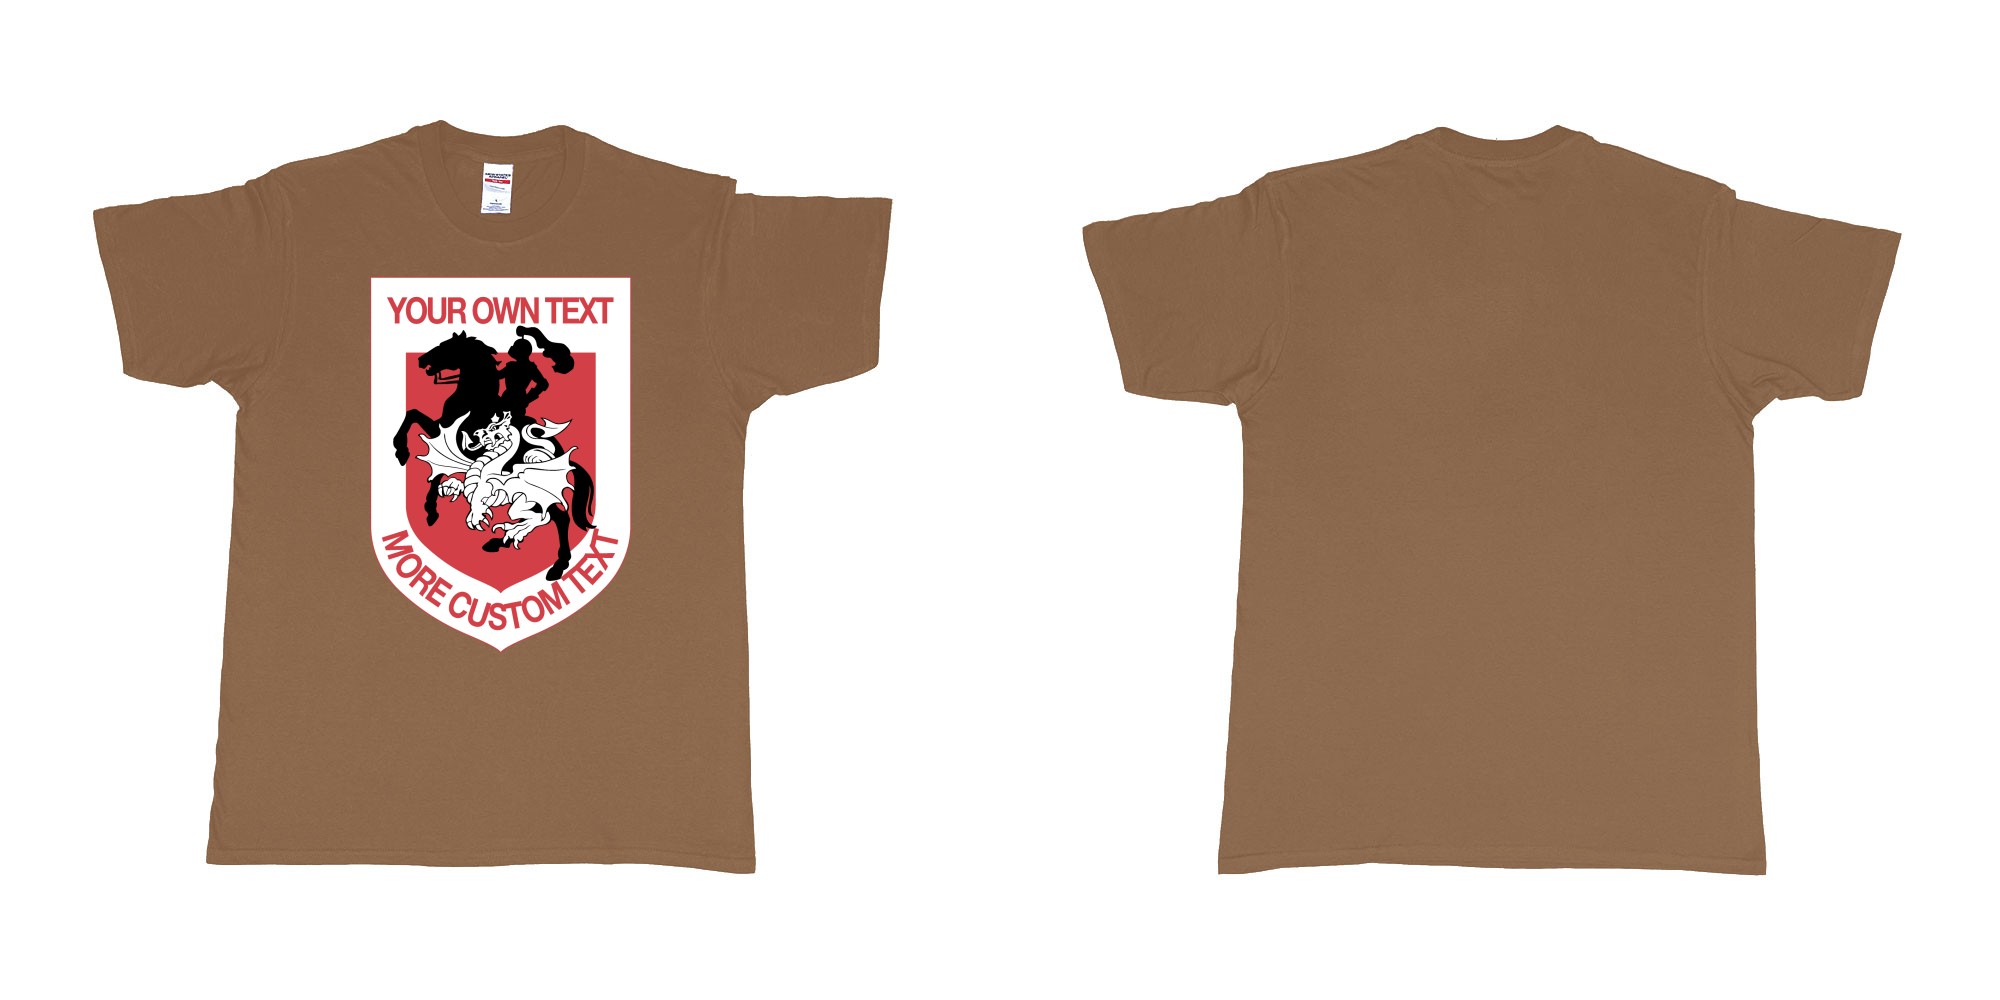 Custom tshirt design st george illawarra dragons custom design in fabric color chestnut choice your own text made in Bali by The Pirate Way